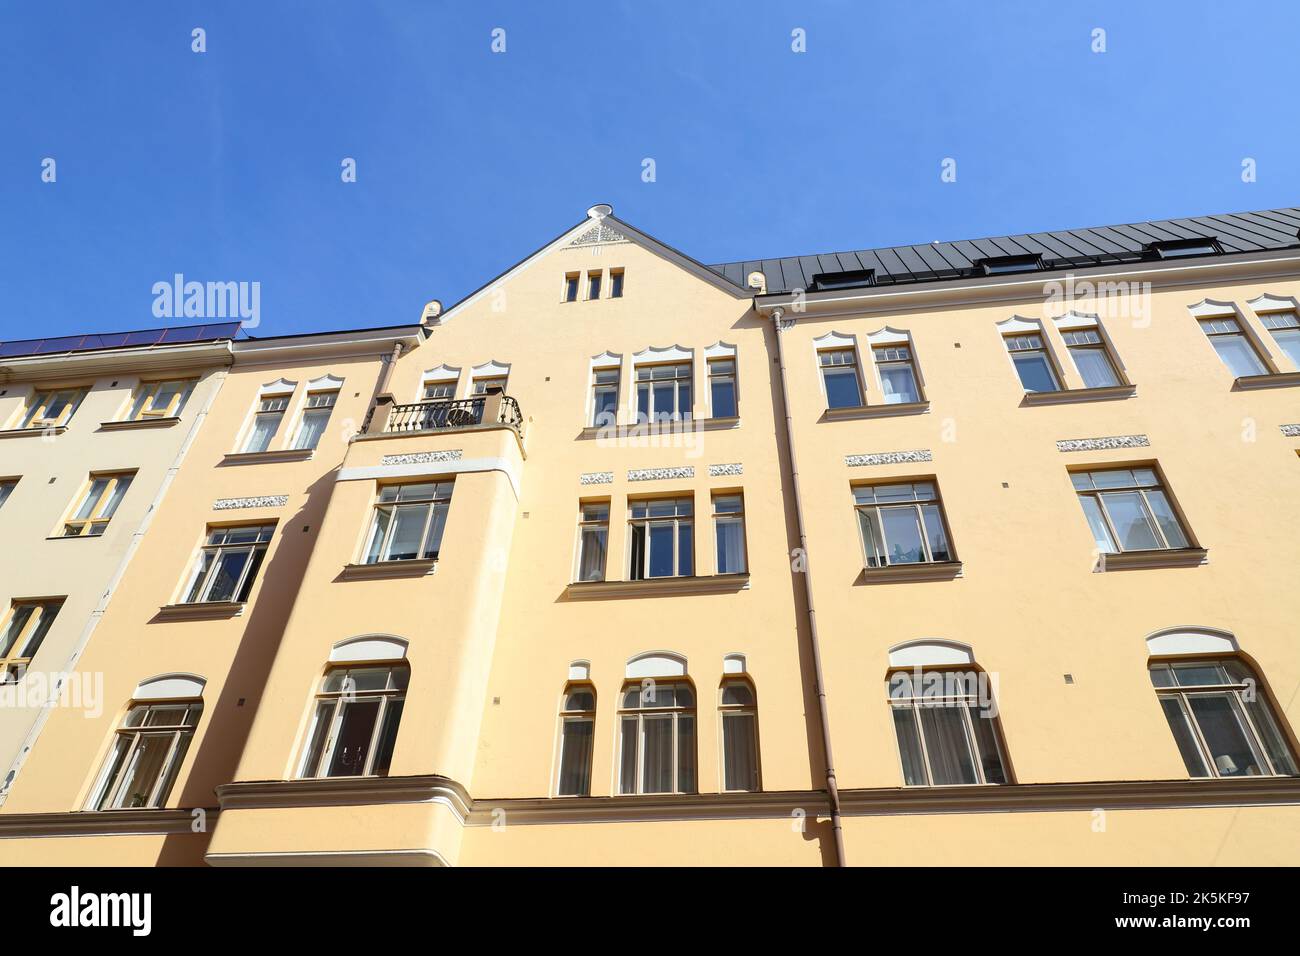 Low angle view of multi story residential buildings facades. Stock Photo